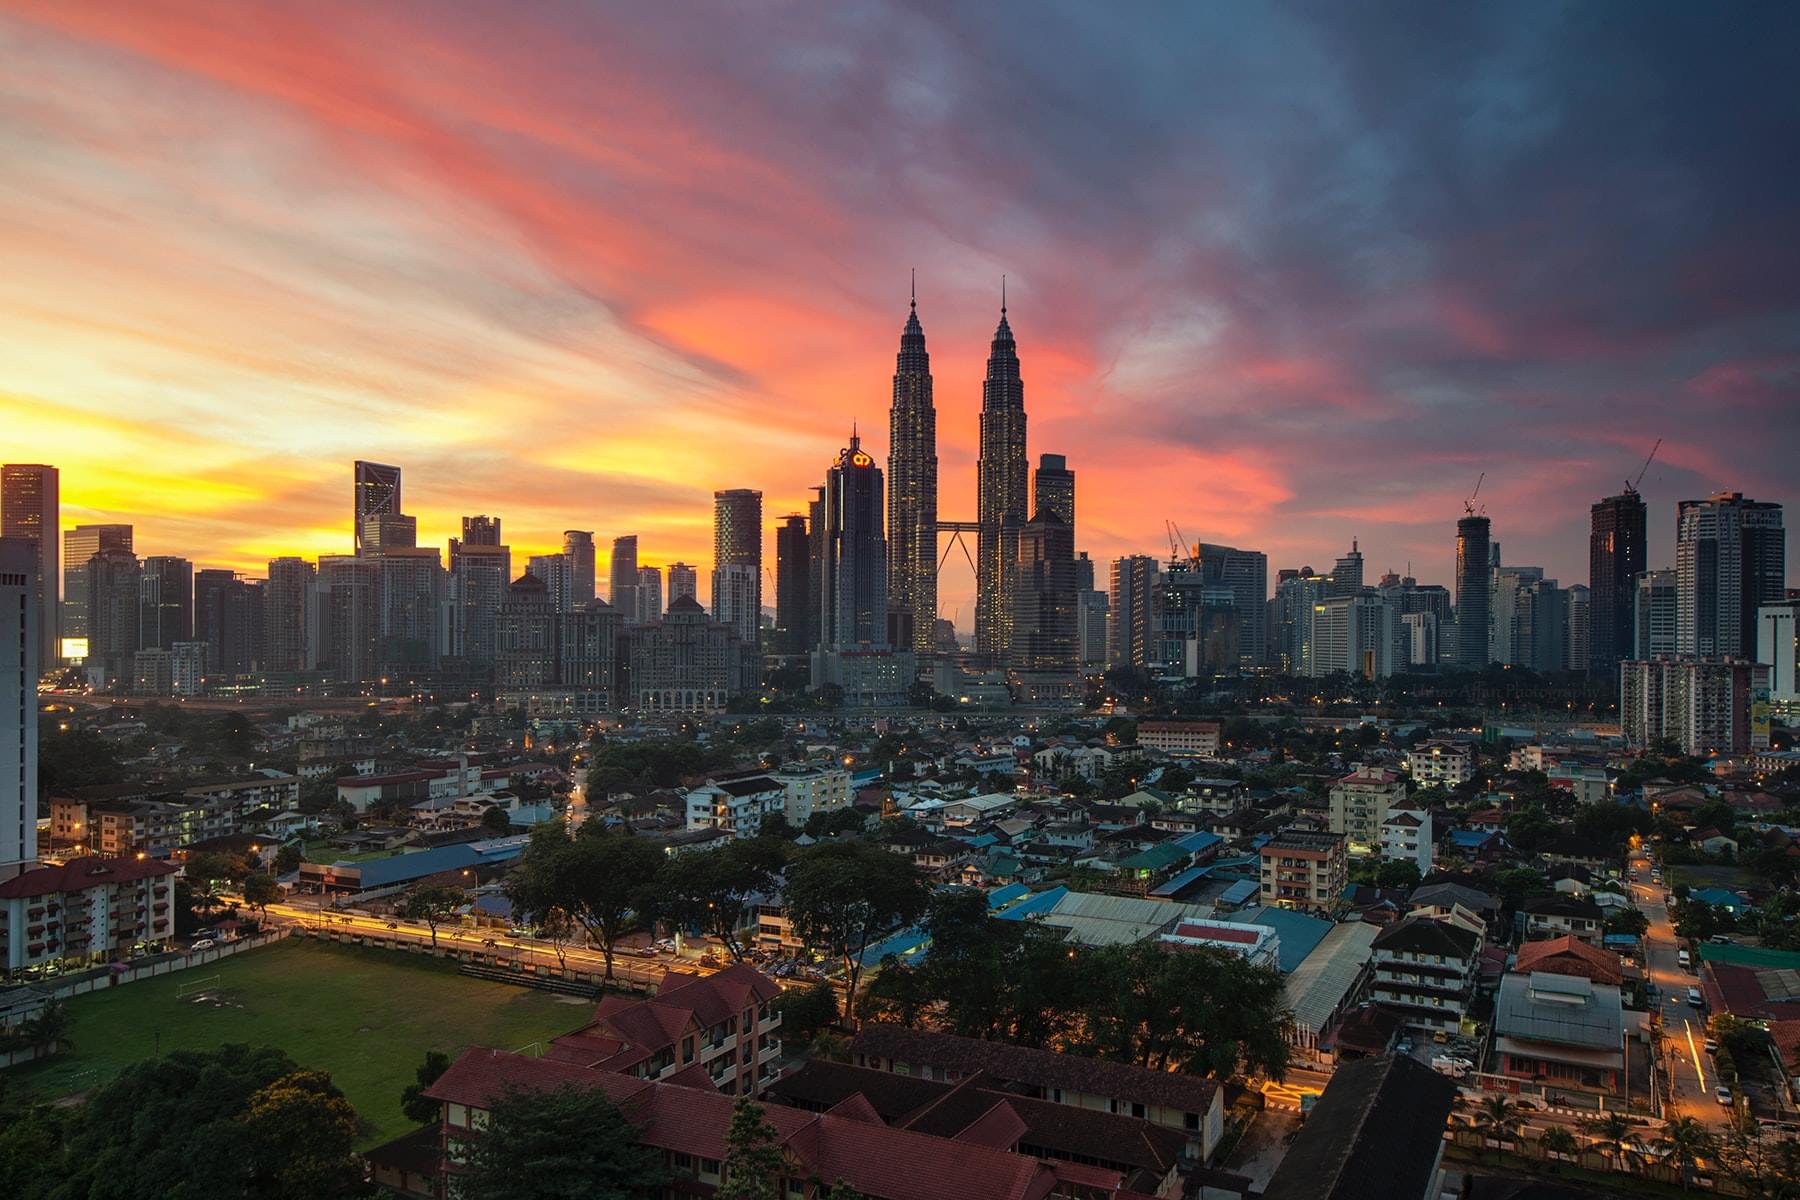 Marvel at the skyline of Malaysia during sunset